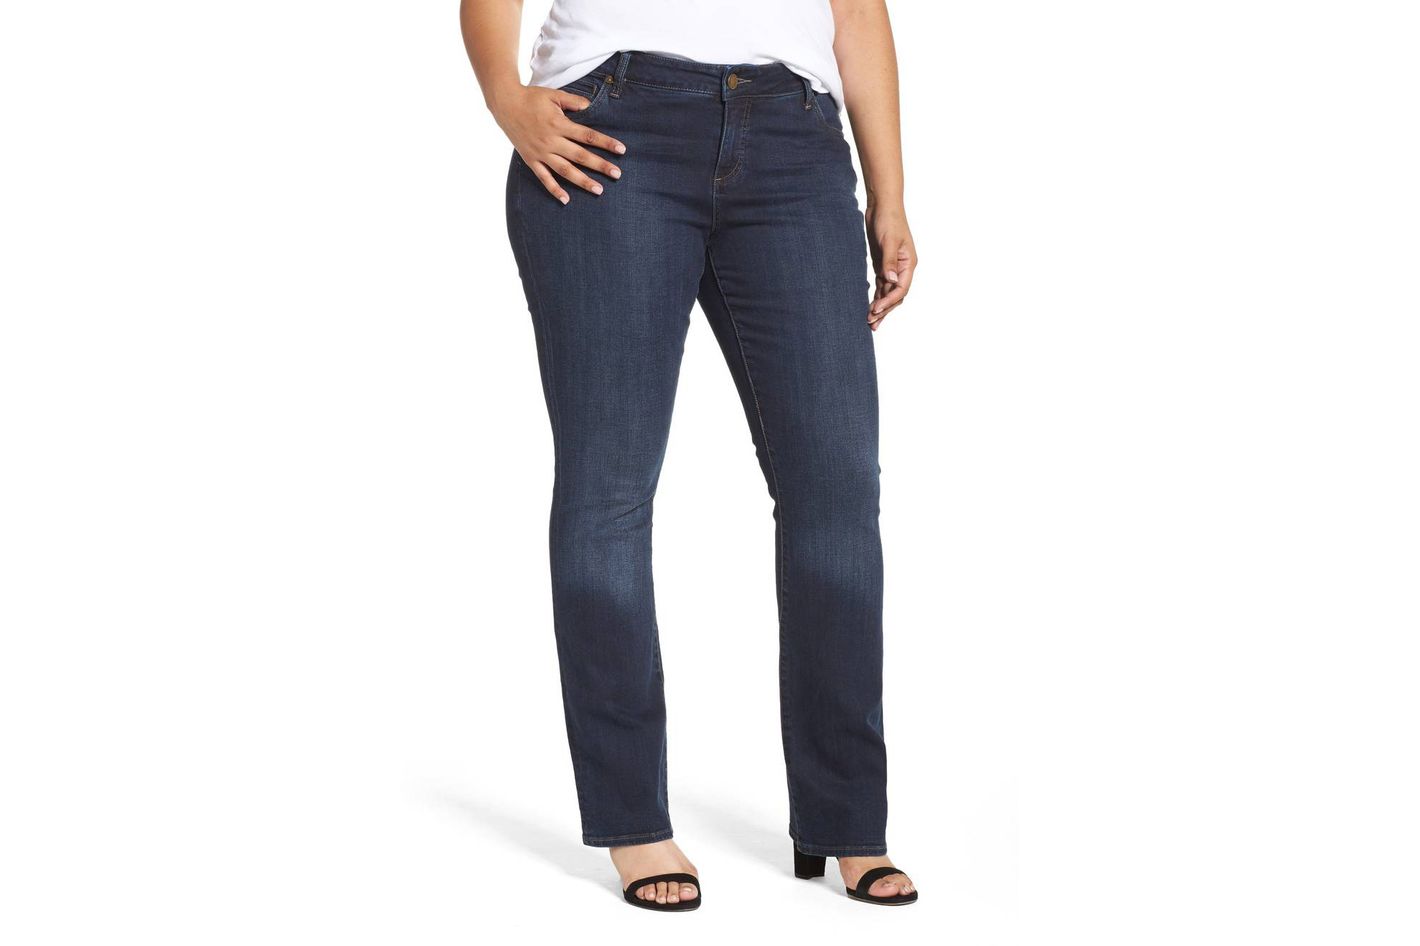 12 Perfect Pairs of Jeans for Curvy Women